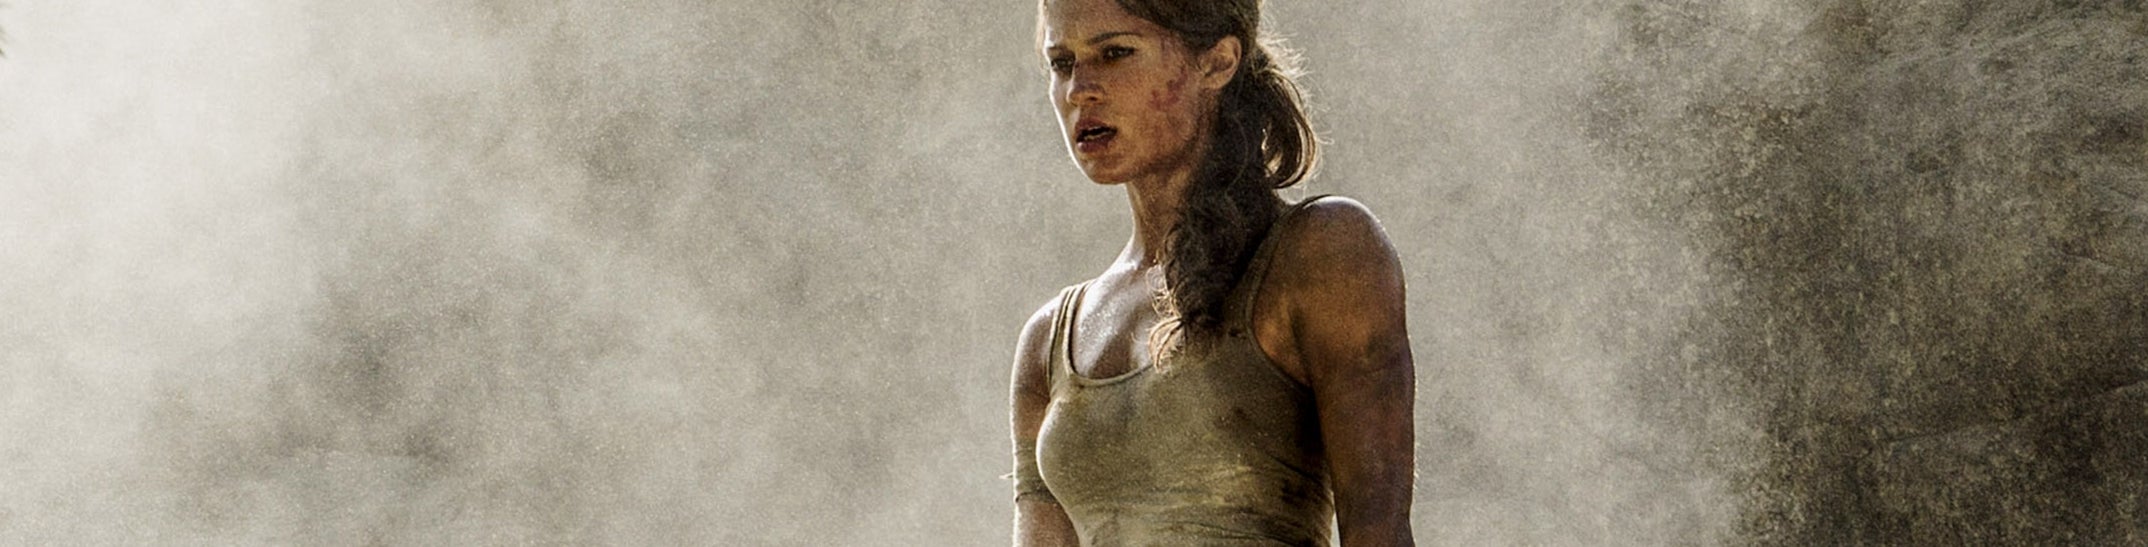 Image for Tomb Raider film review - a new kind of game-to-film failure